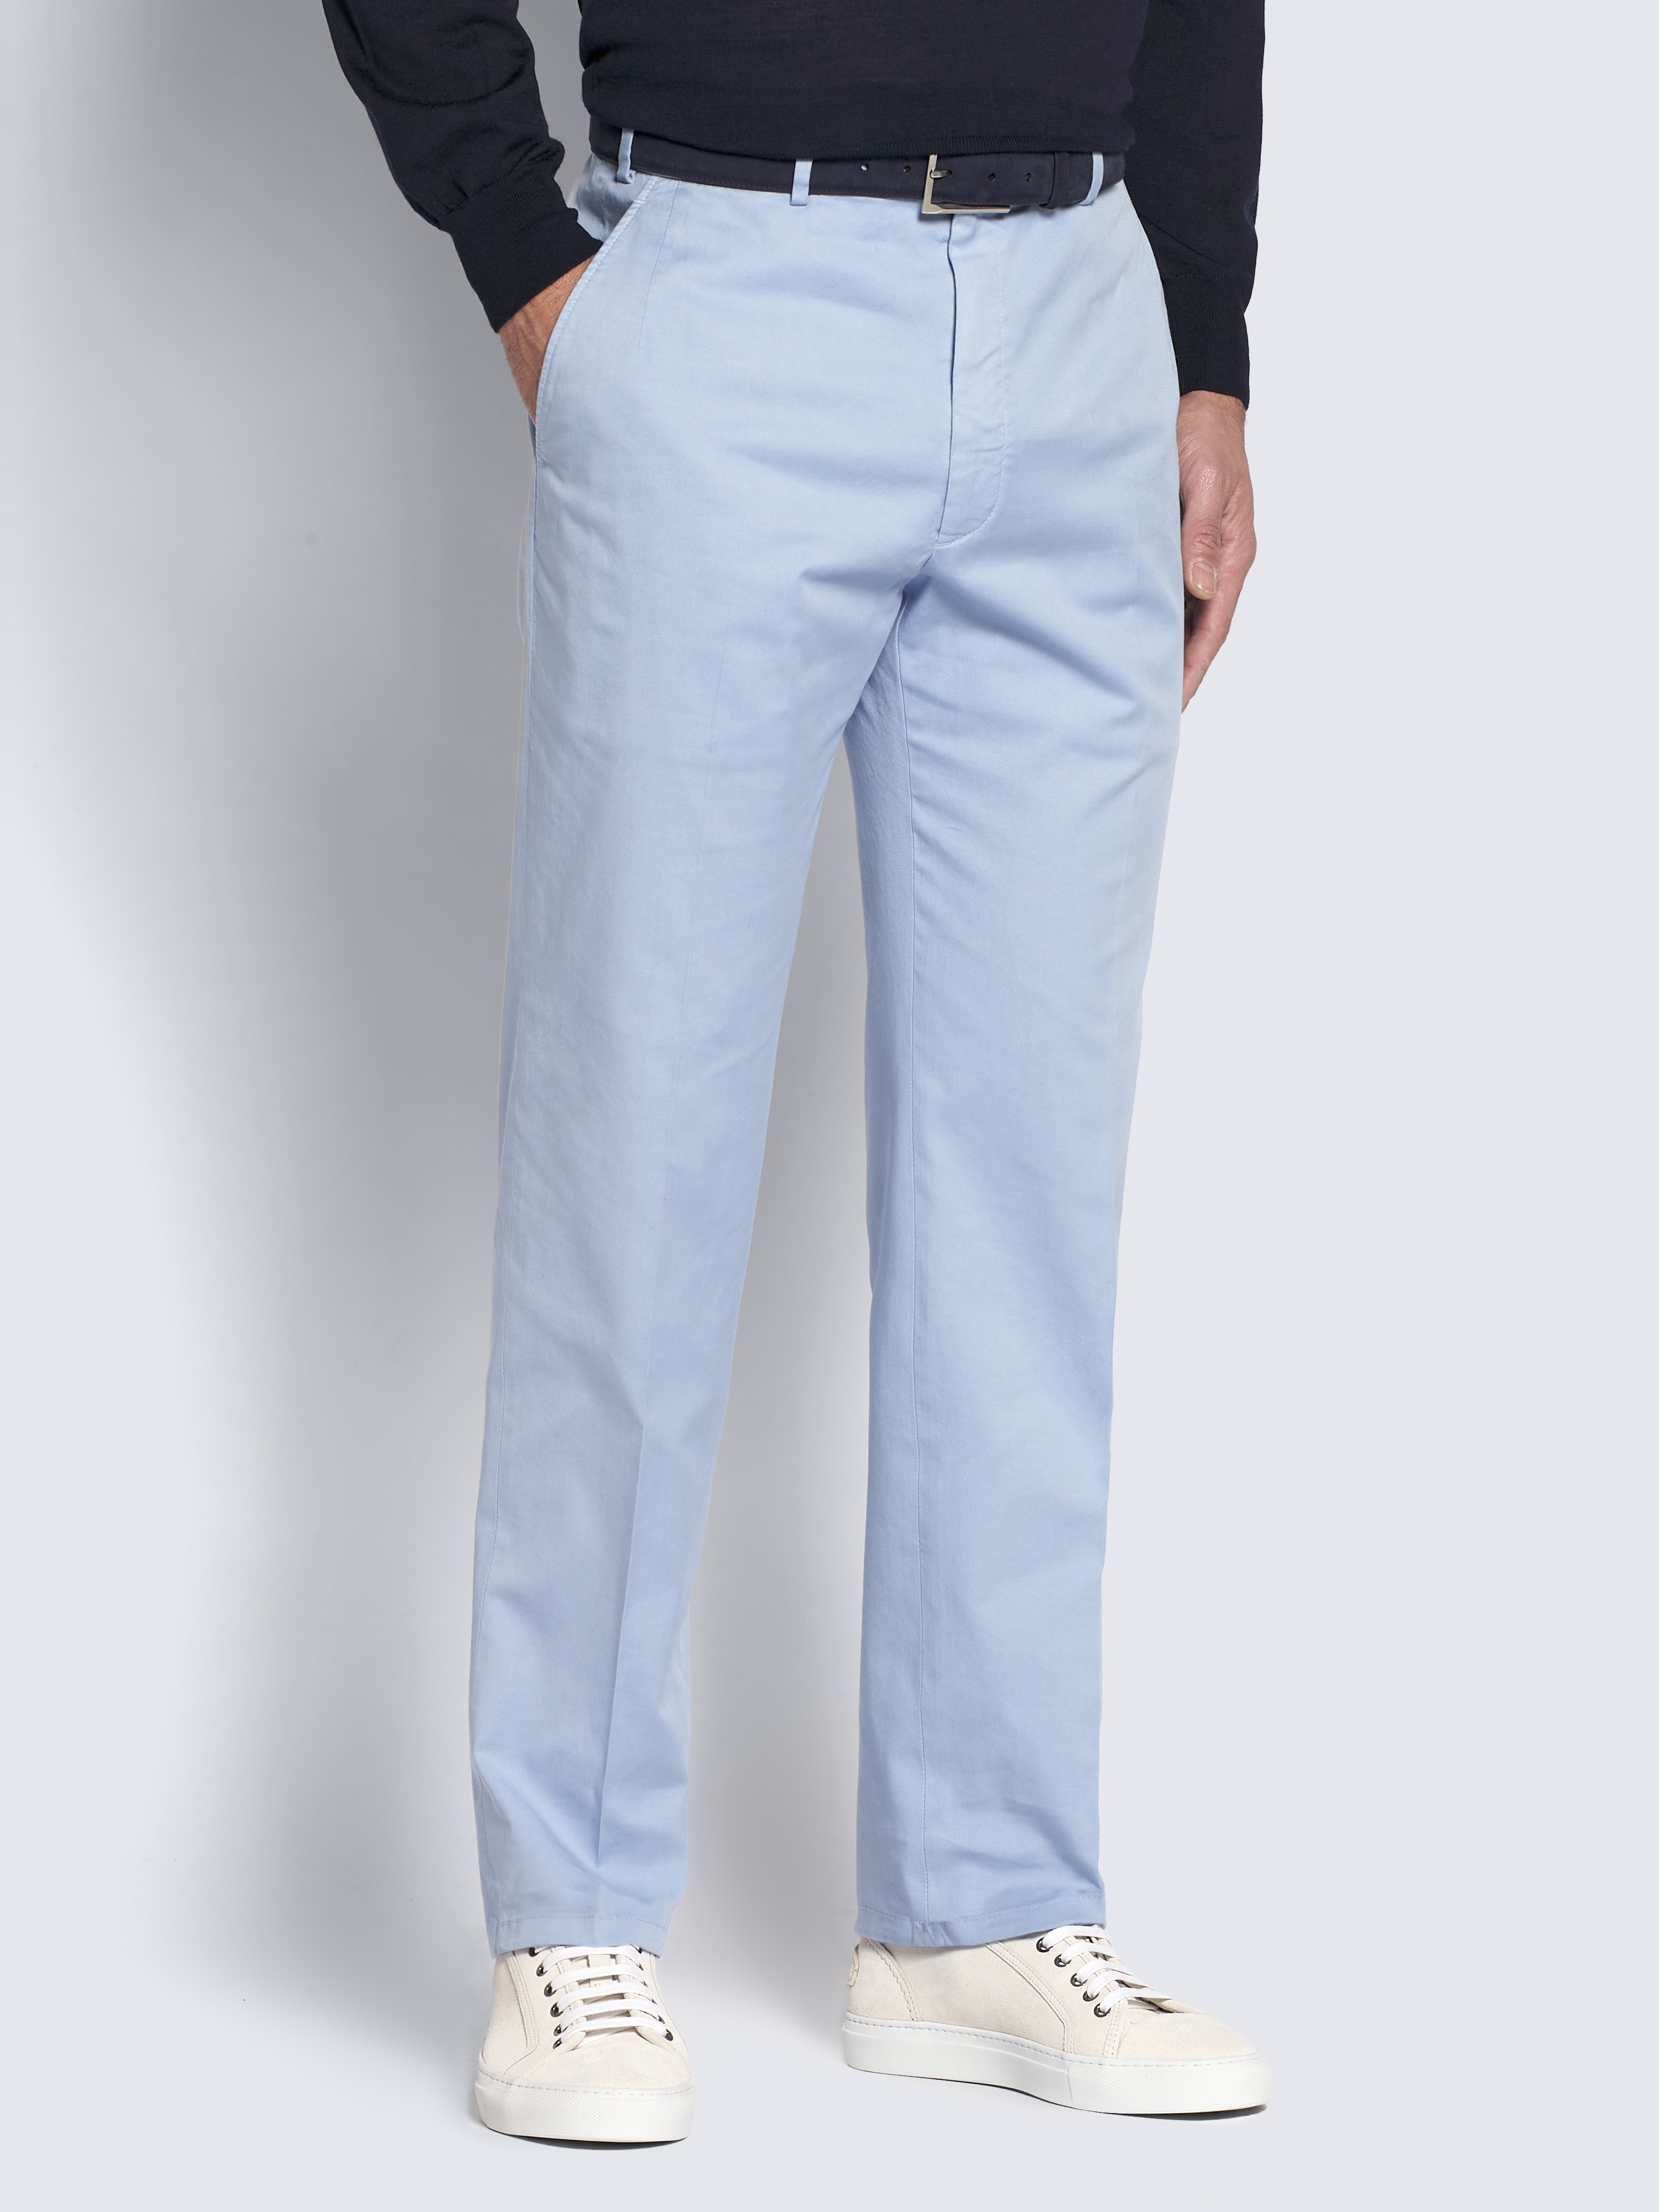 Life win Regular Fit Boys Light Blue Trousers  Price History